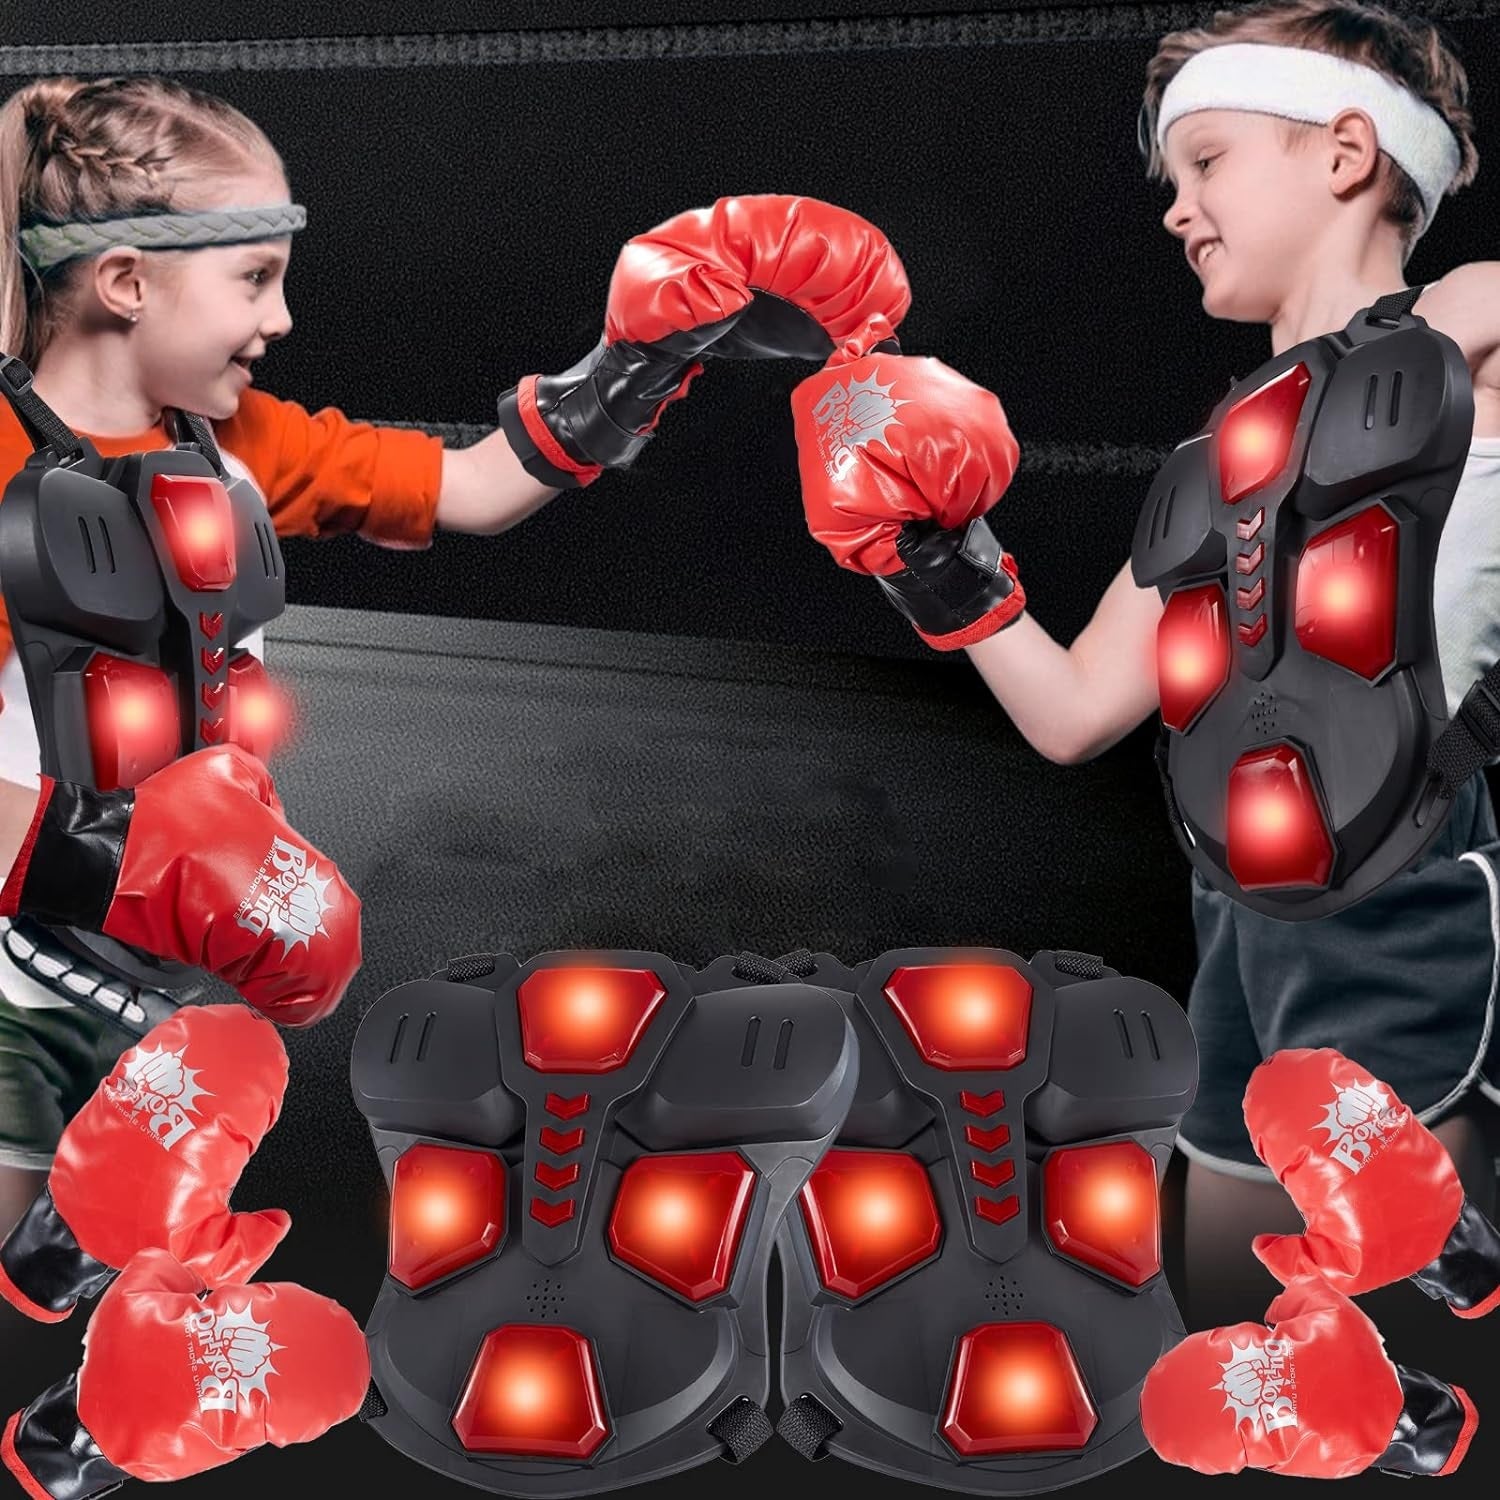 Boxing Gear with Lights & Sound